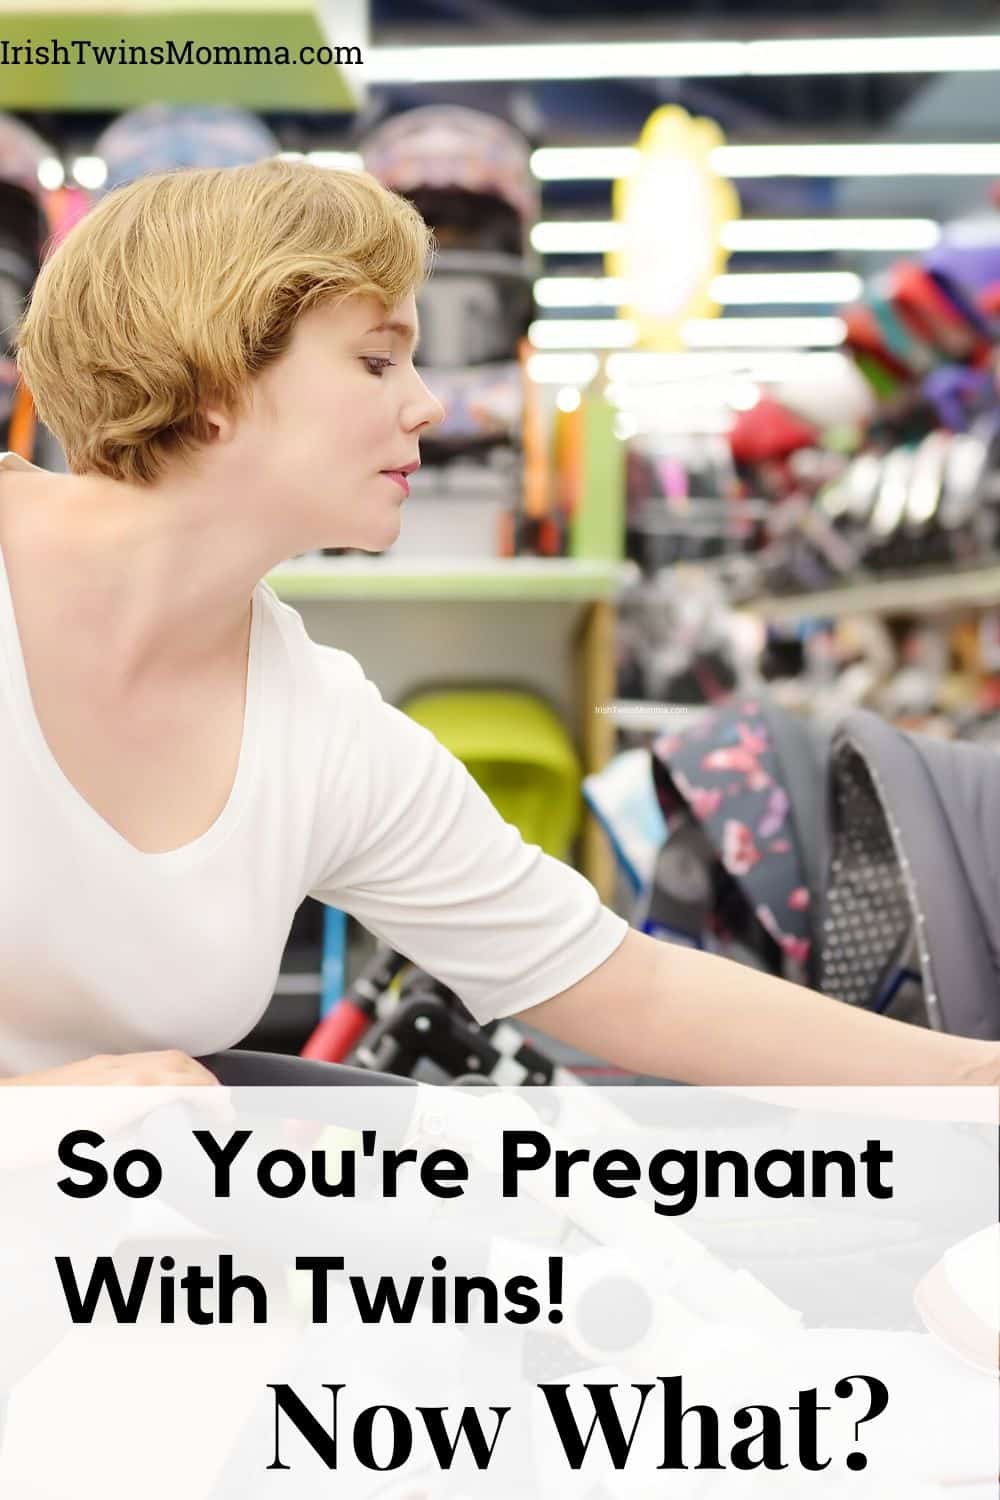 So You're Pregnant With Twins! Now What?